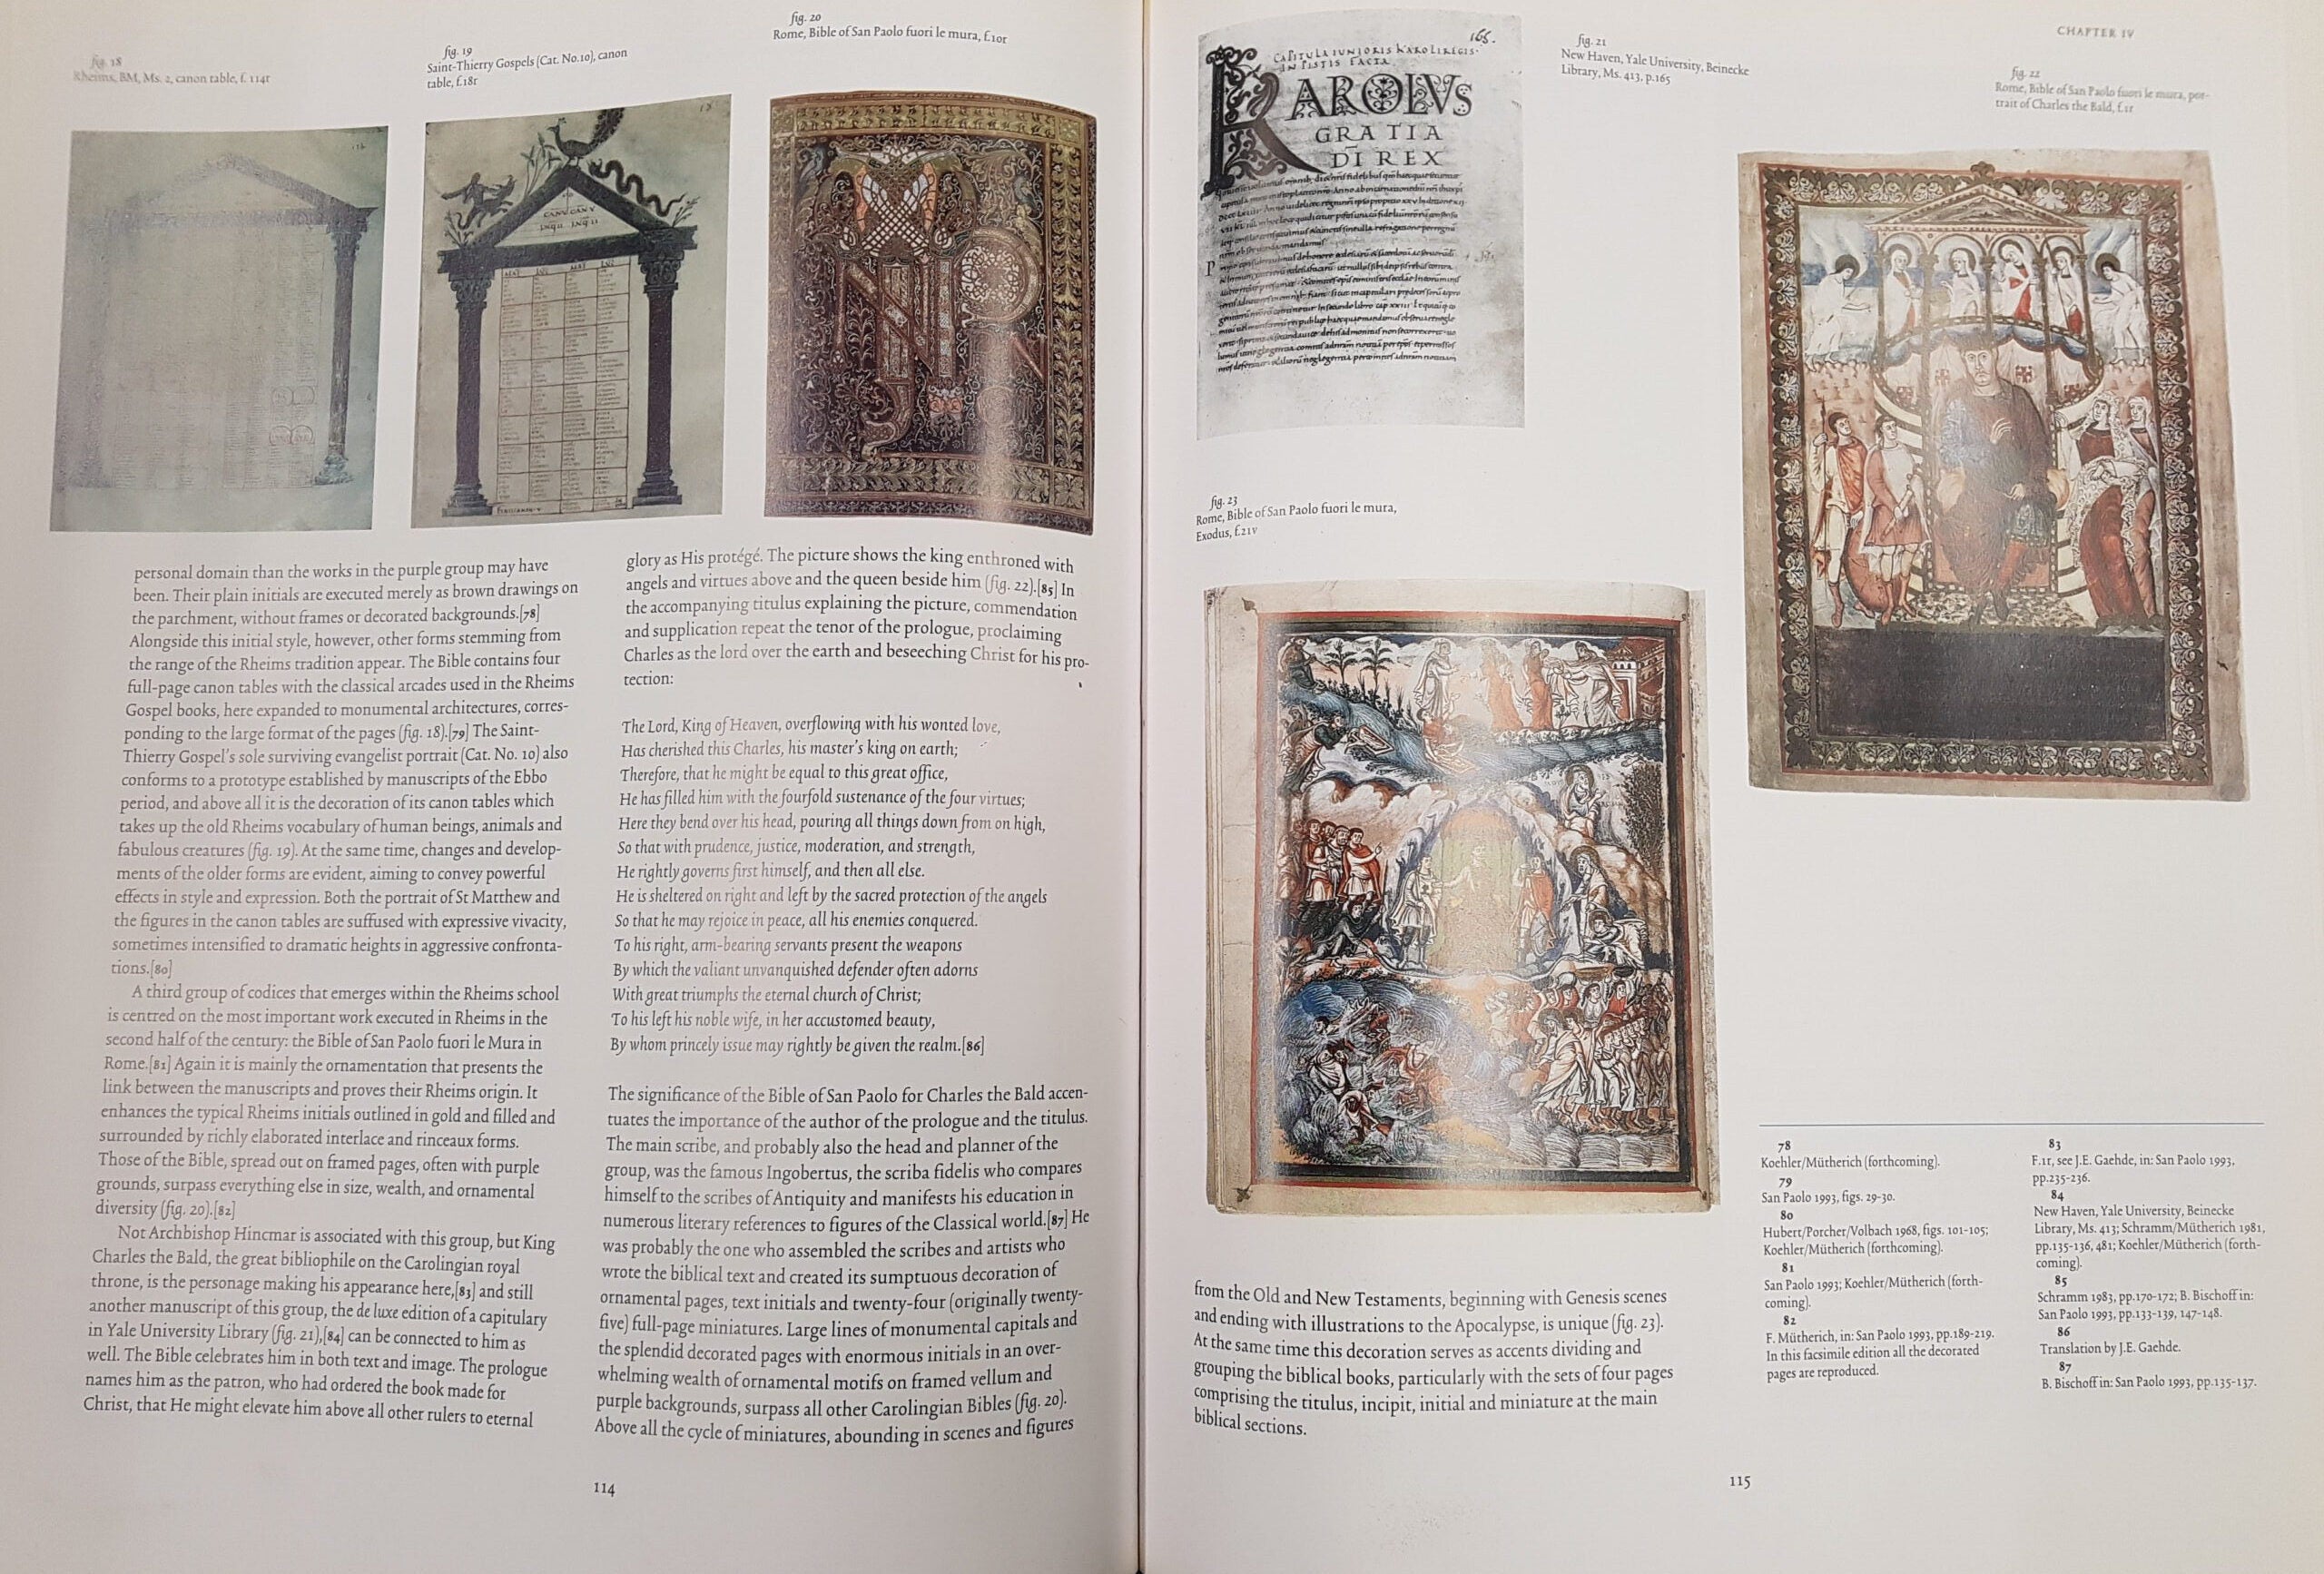 The Utrecht Psalter in Medieval Art- picturing the psalms of David